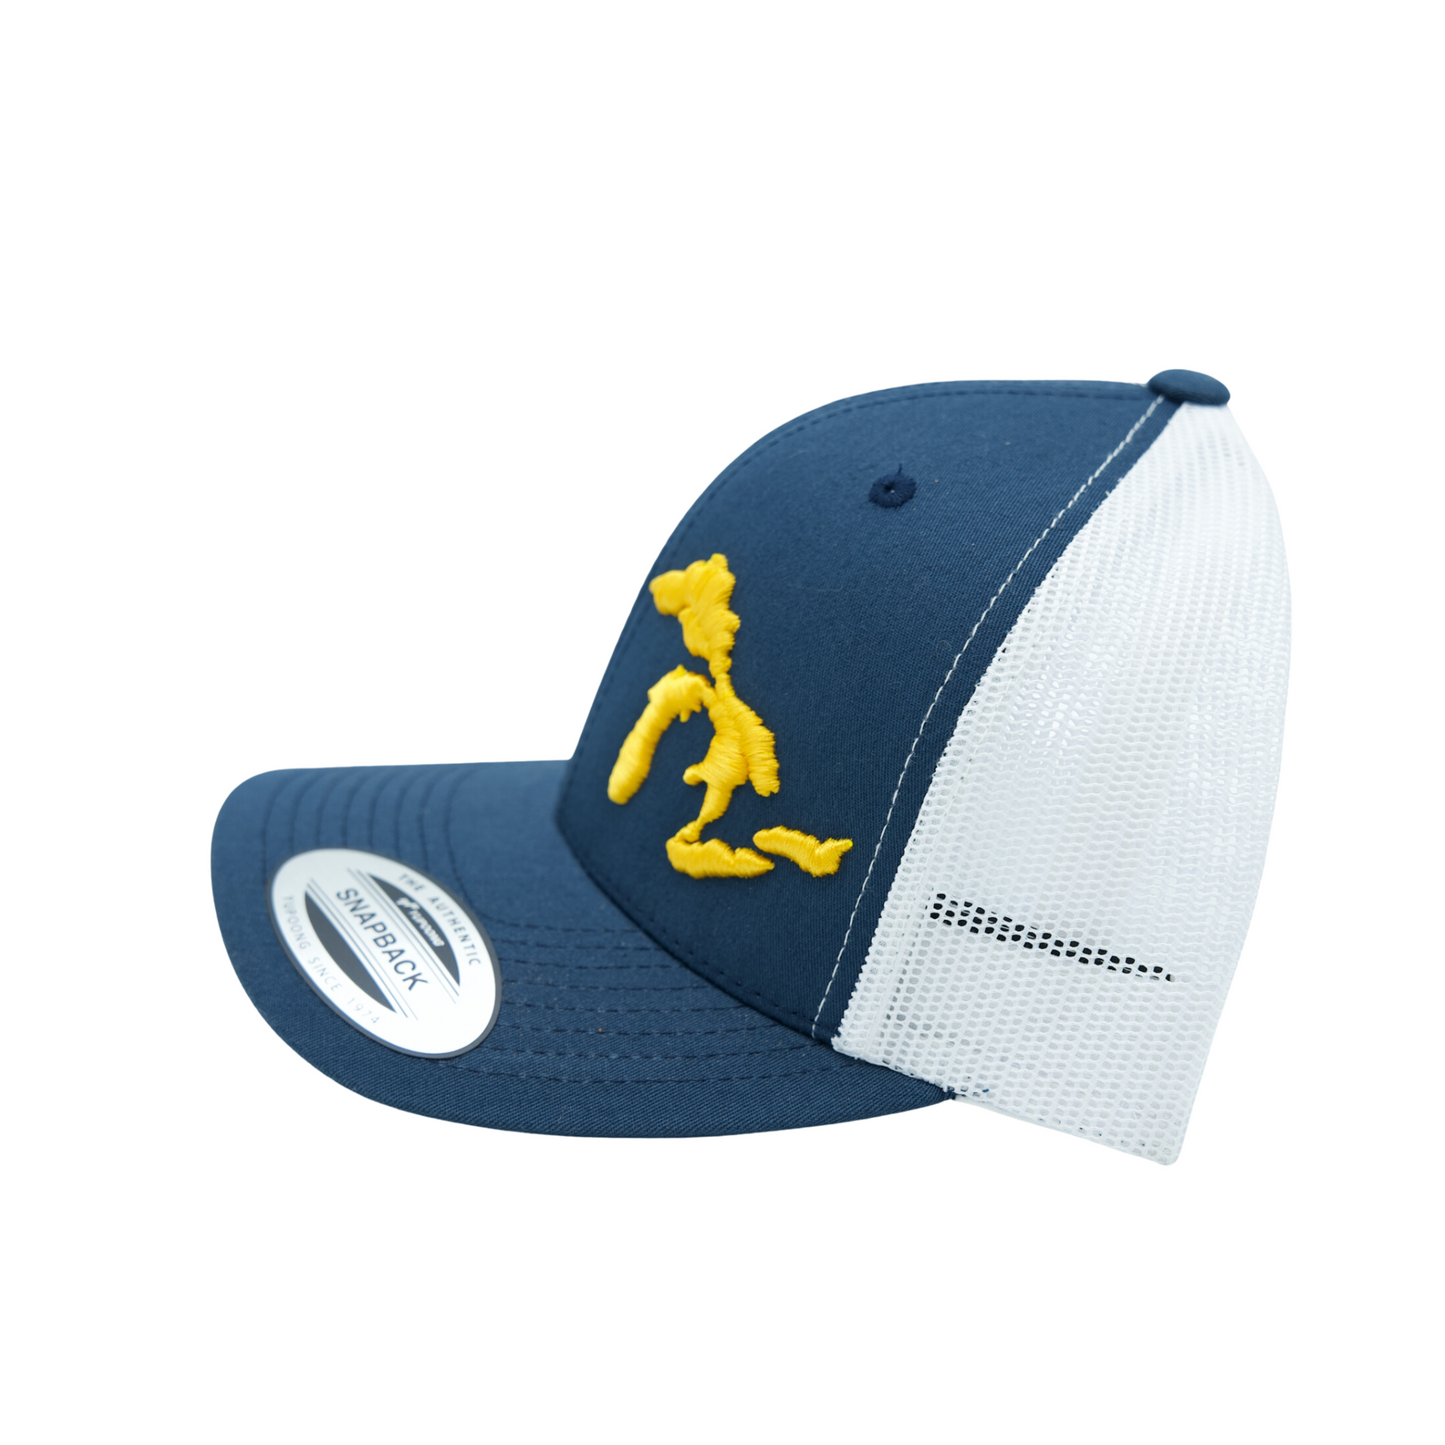 Great Lakes Trucker Hat Navy/White/Gold